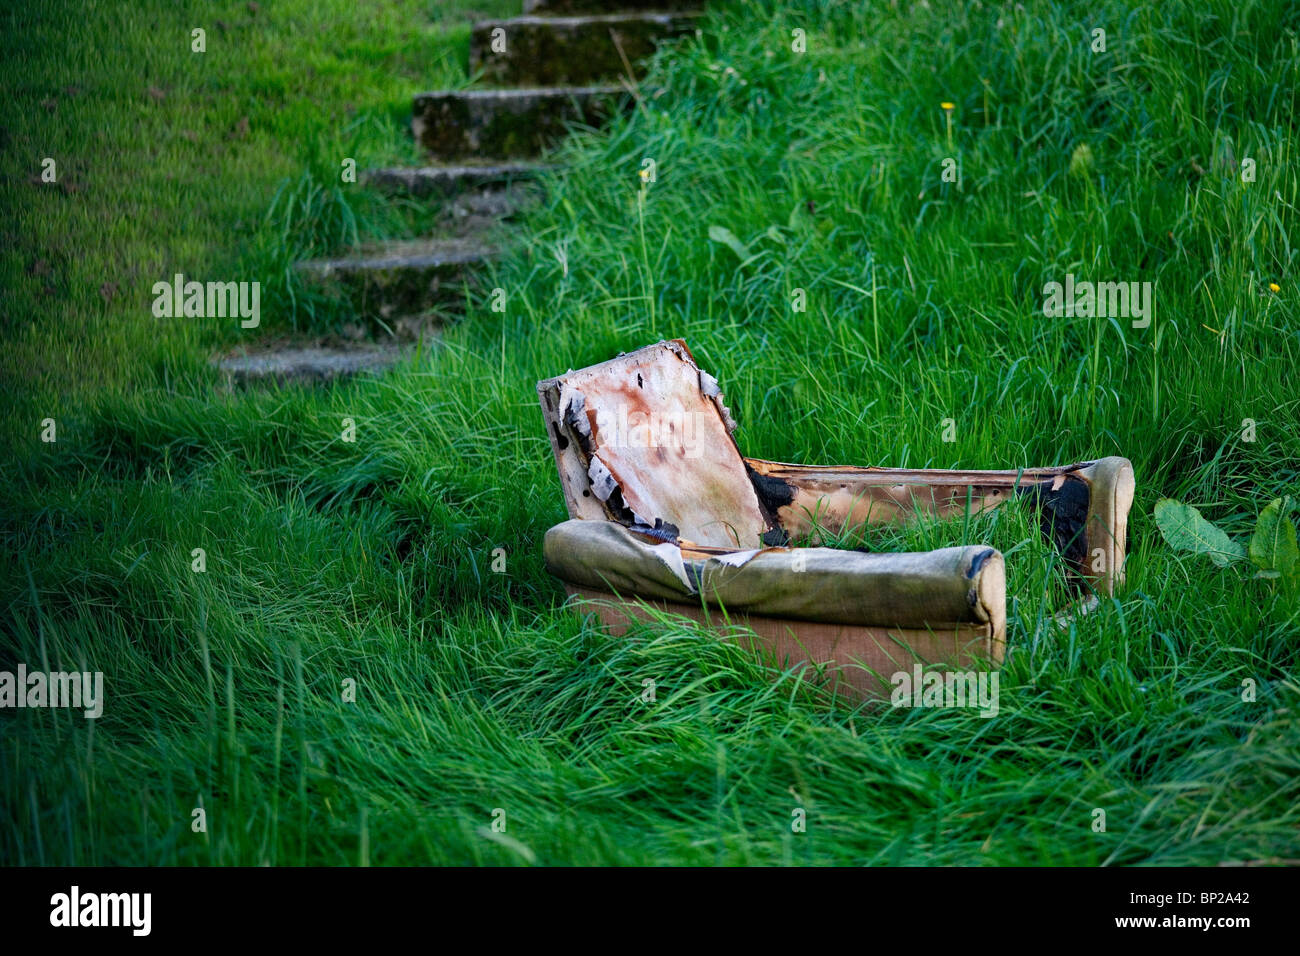 Abandoned sofa in London garden overgrown with grass Stock Photo